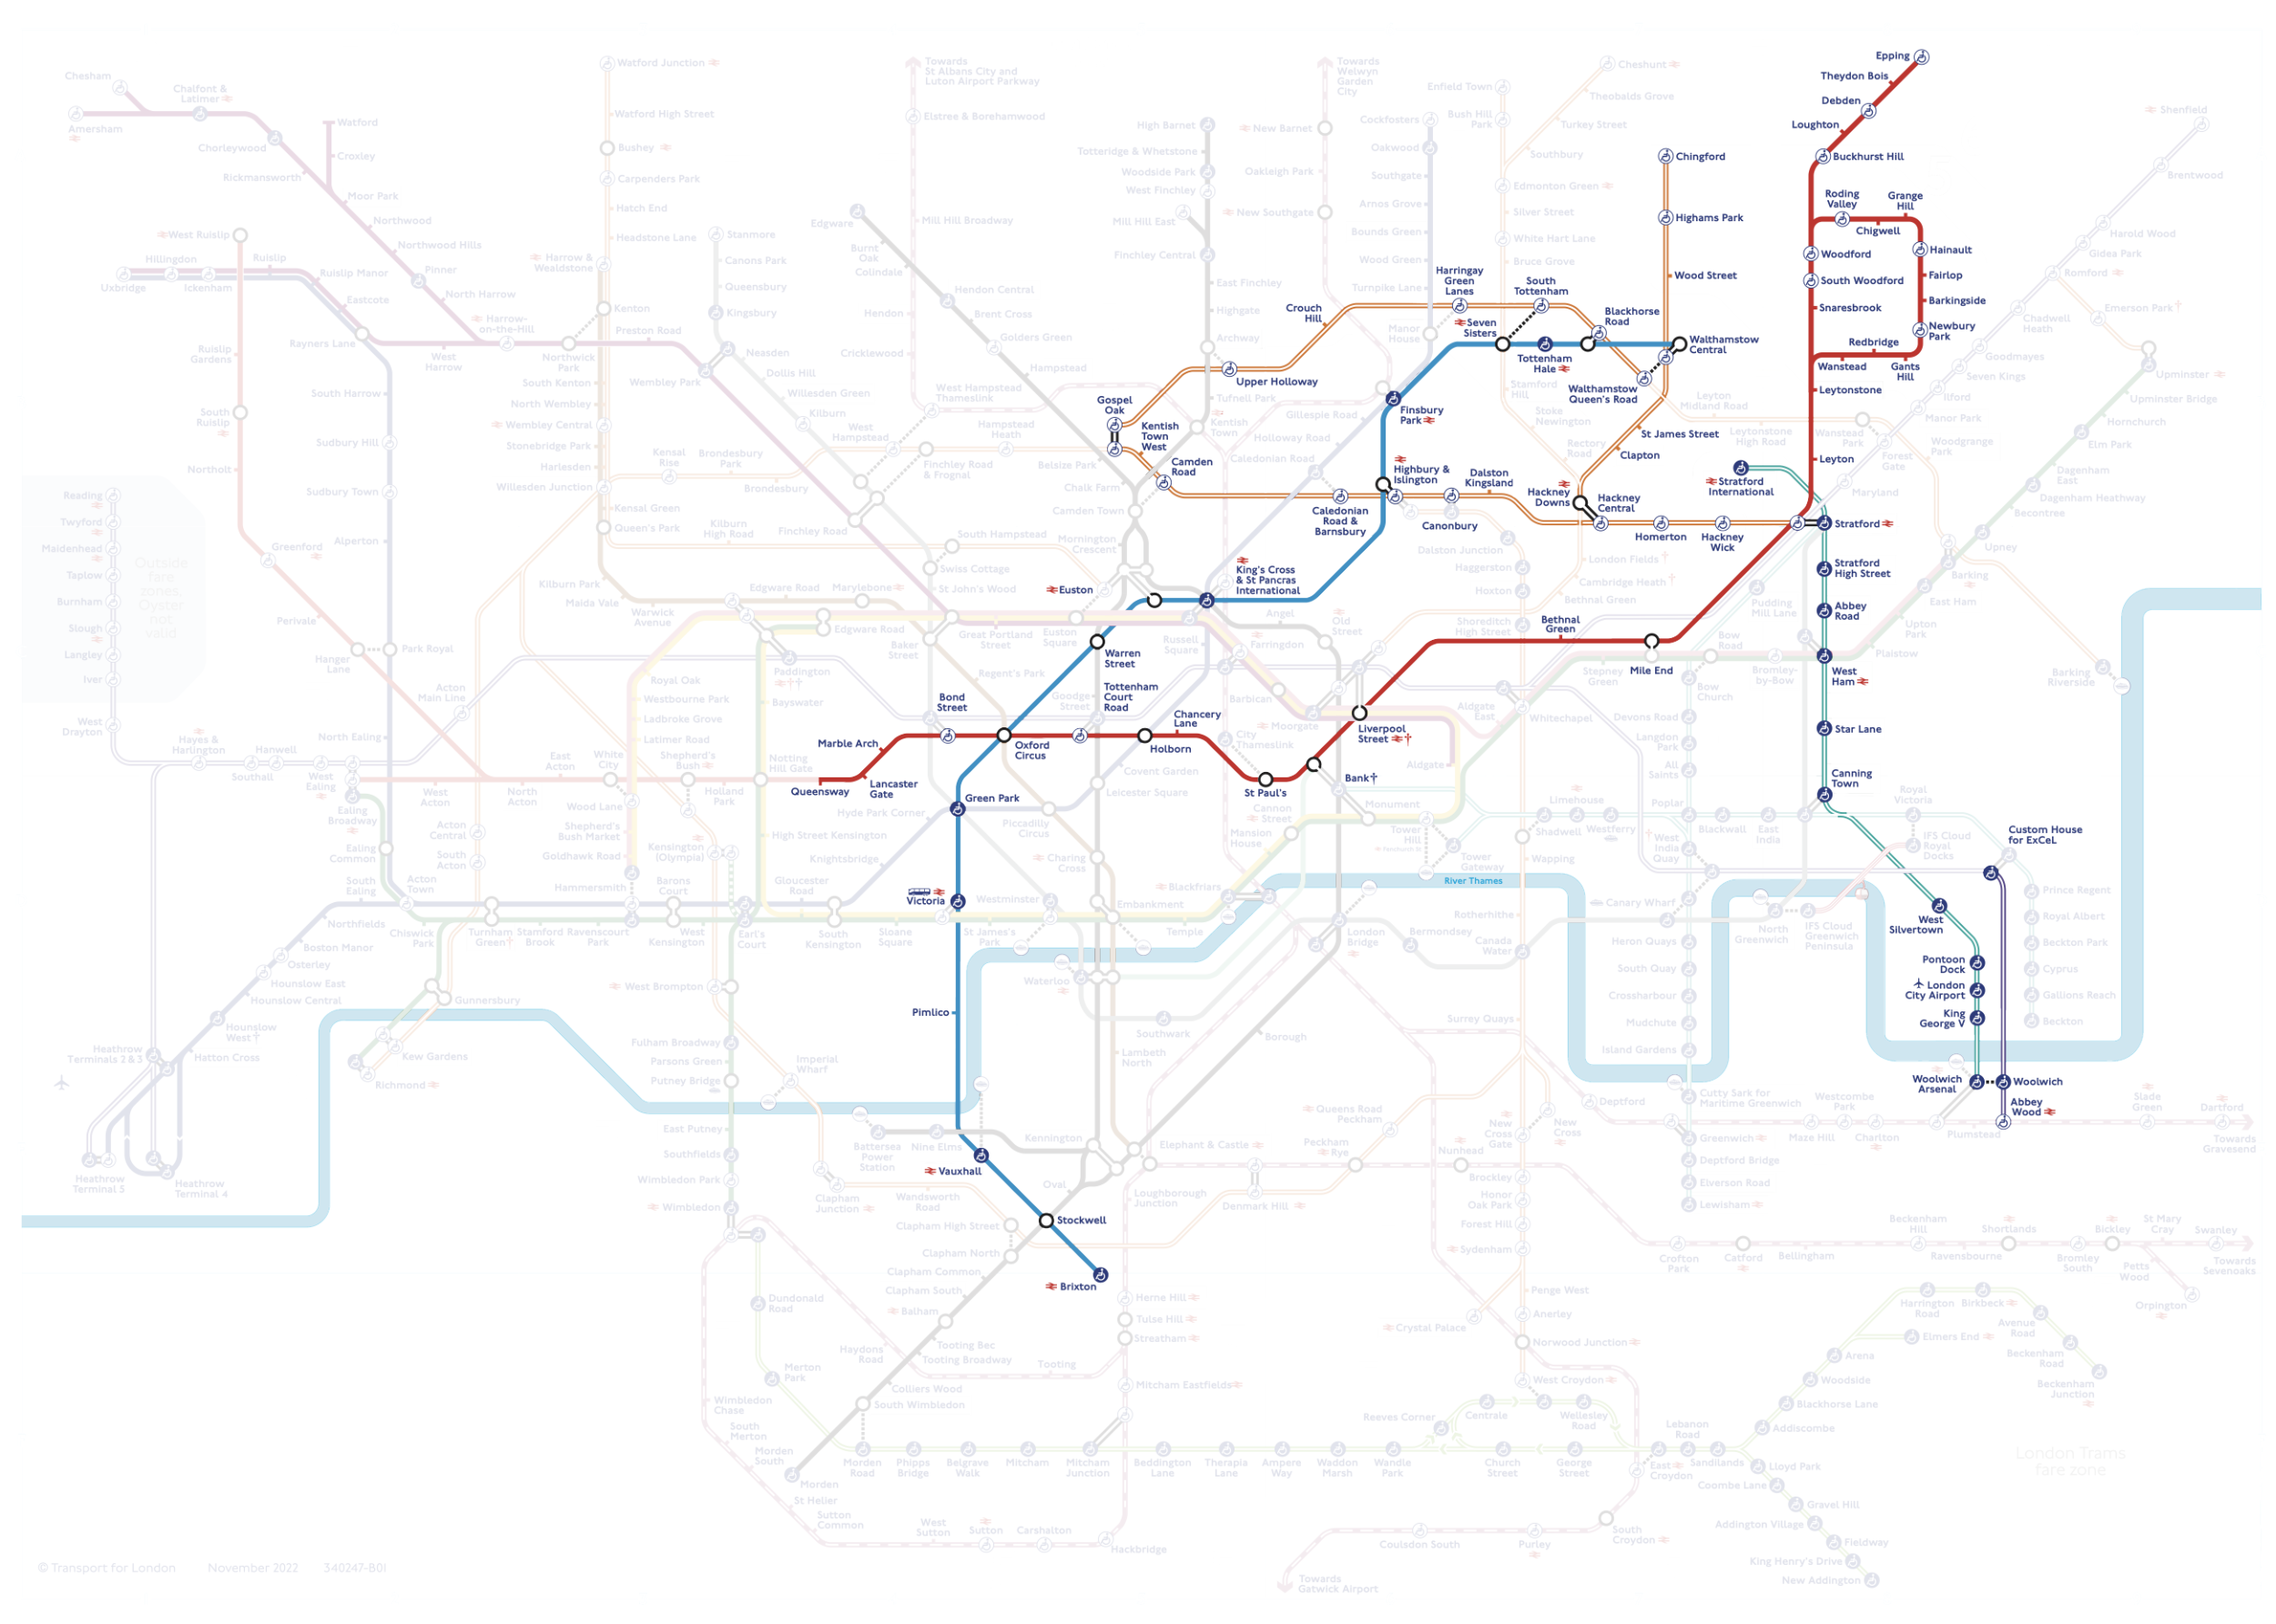 My progress map with some new bits coloured in for parts of the Overground, DLR and Elizabeth line